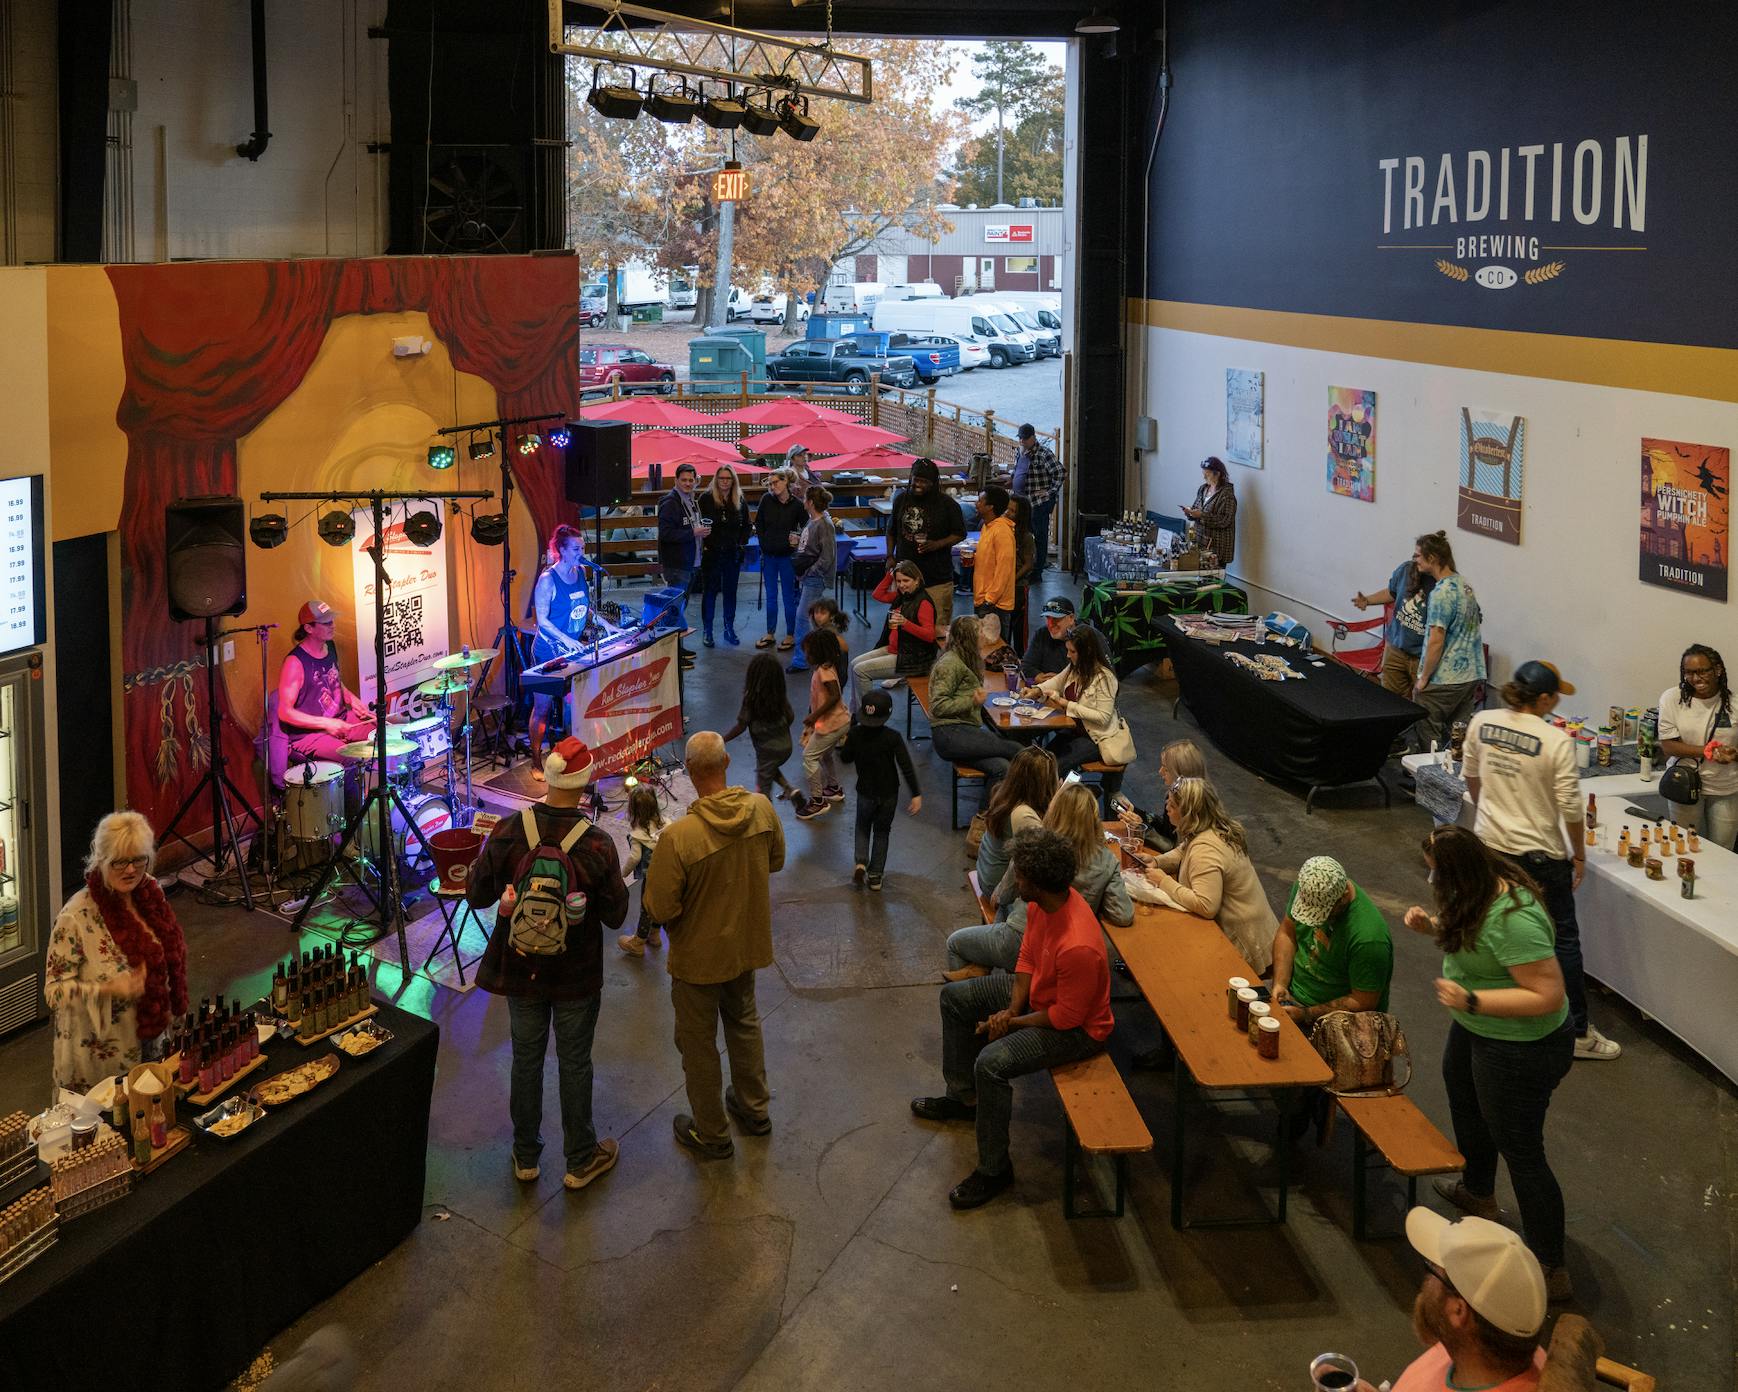 Wide shot of the taproom with vendors and a band playing.